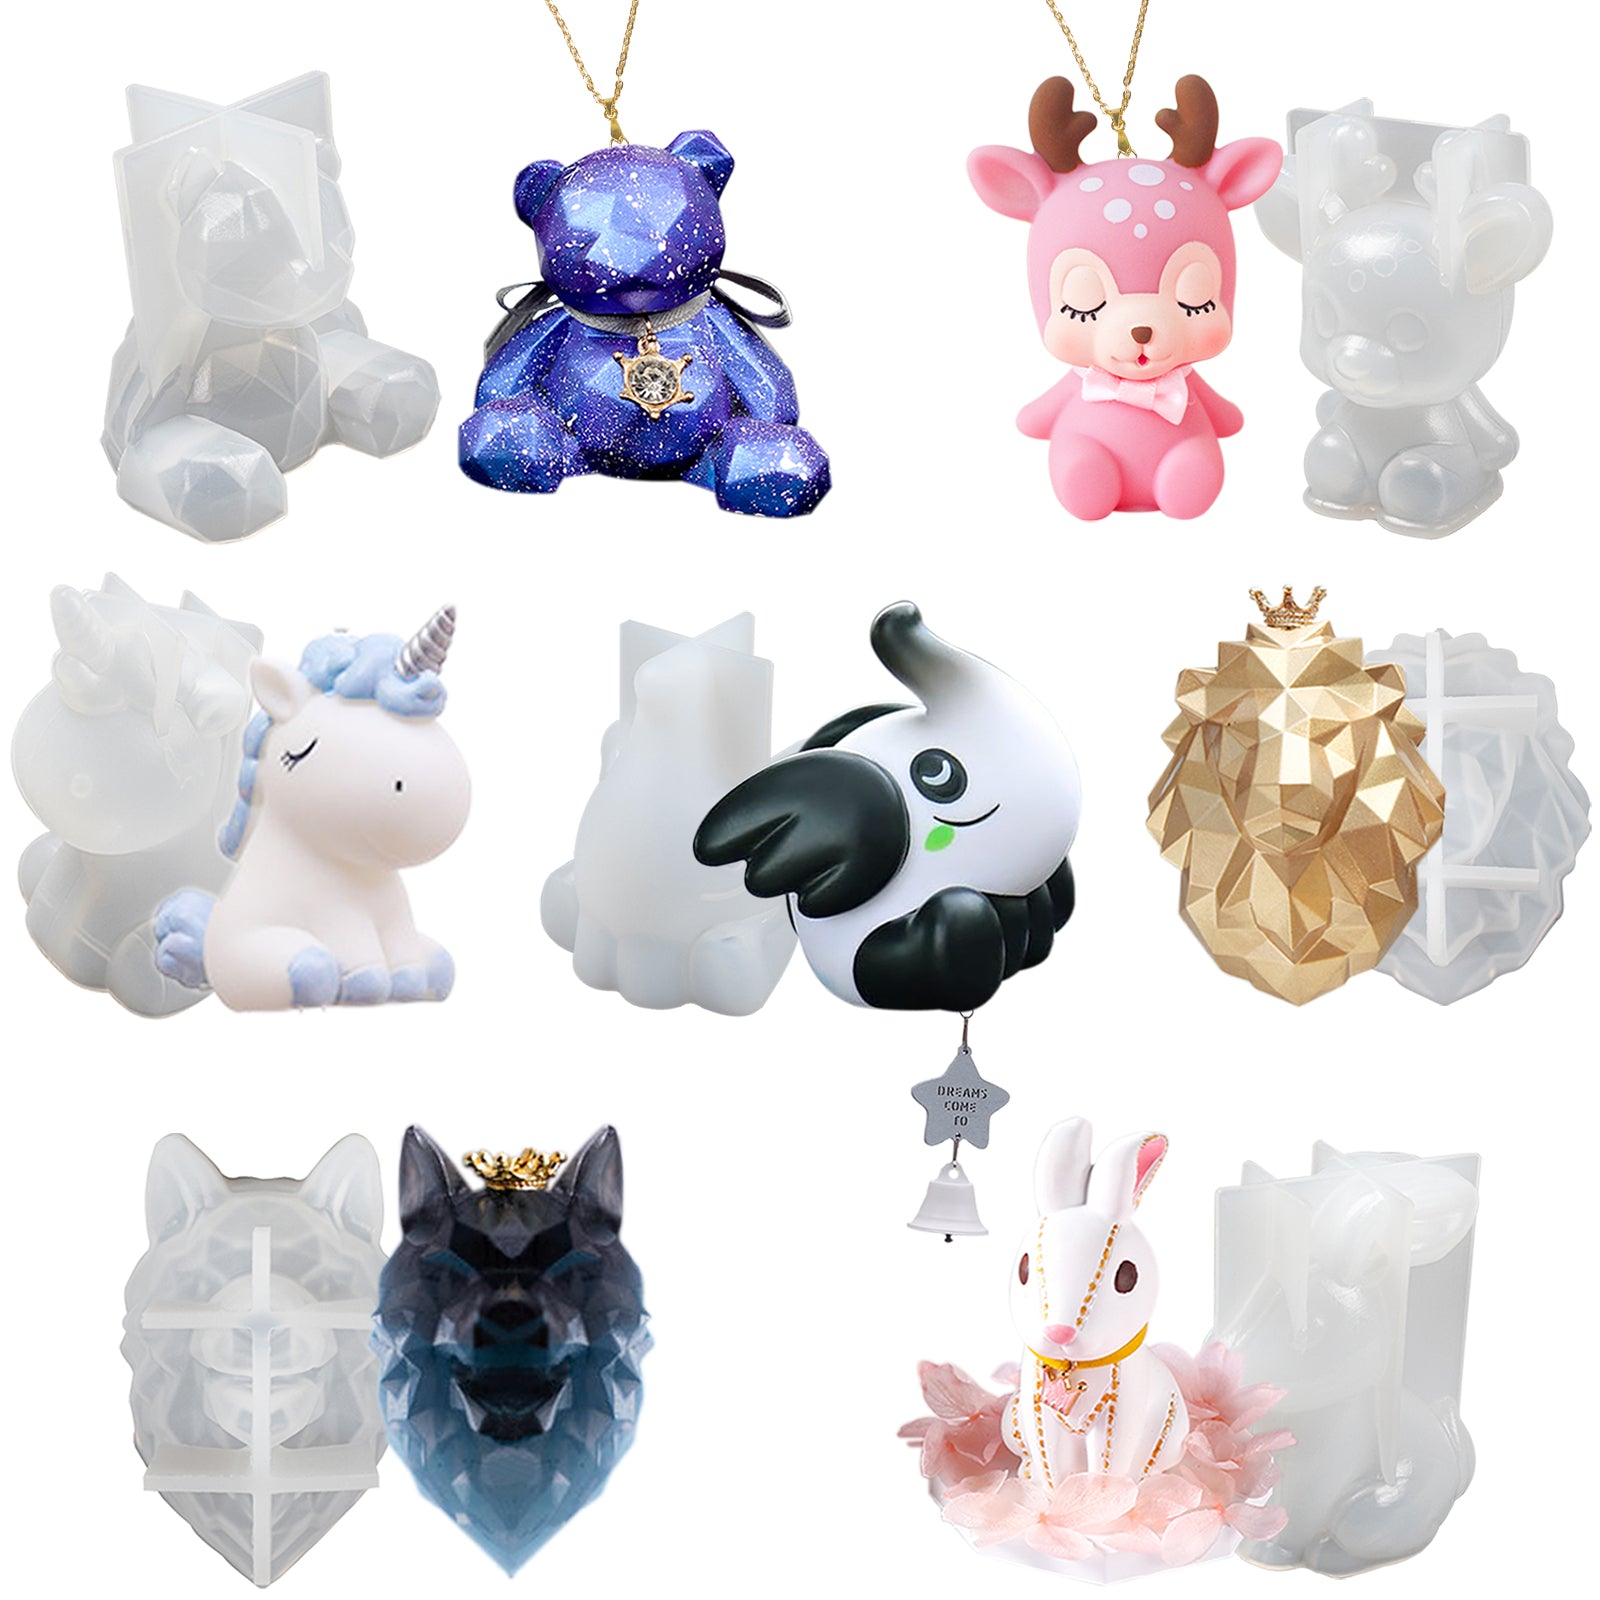 LUXWIN 7PCS/Set 3D Animal Resin Molds,Epoxy Resin Silicone Molds, Large  Clear Unicorn/Bear/Cat/Lion/Wolf/Orangutan/Deer Epoxy Silicone Molds for  DIY